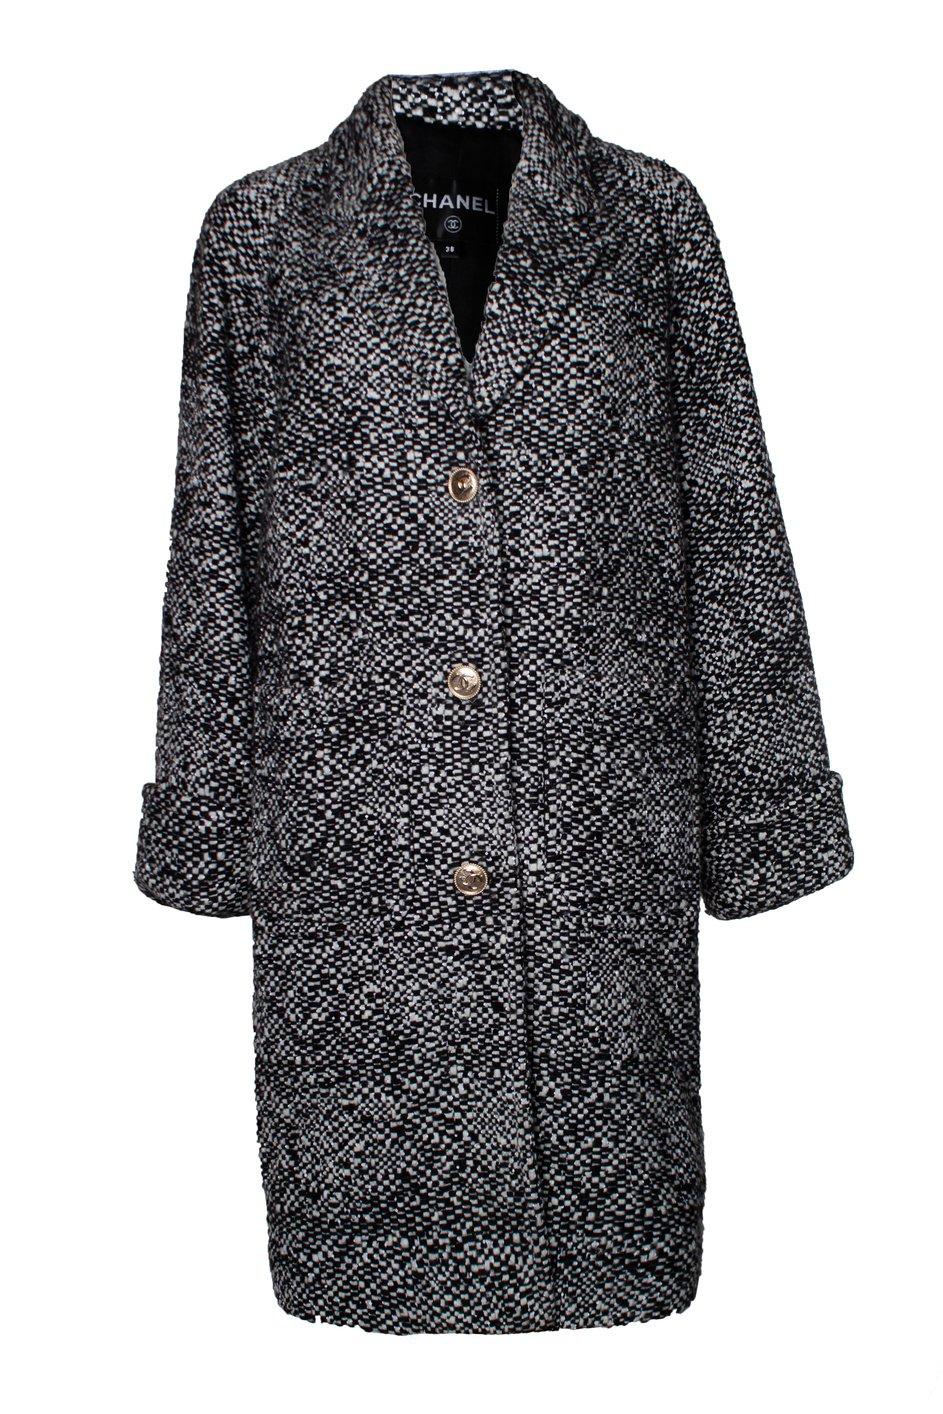 Chanel New Lesage Tweed Coat In New Condition For Sale In Dubai, AE